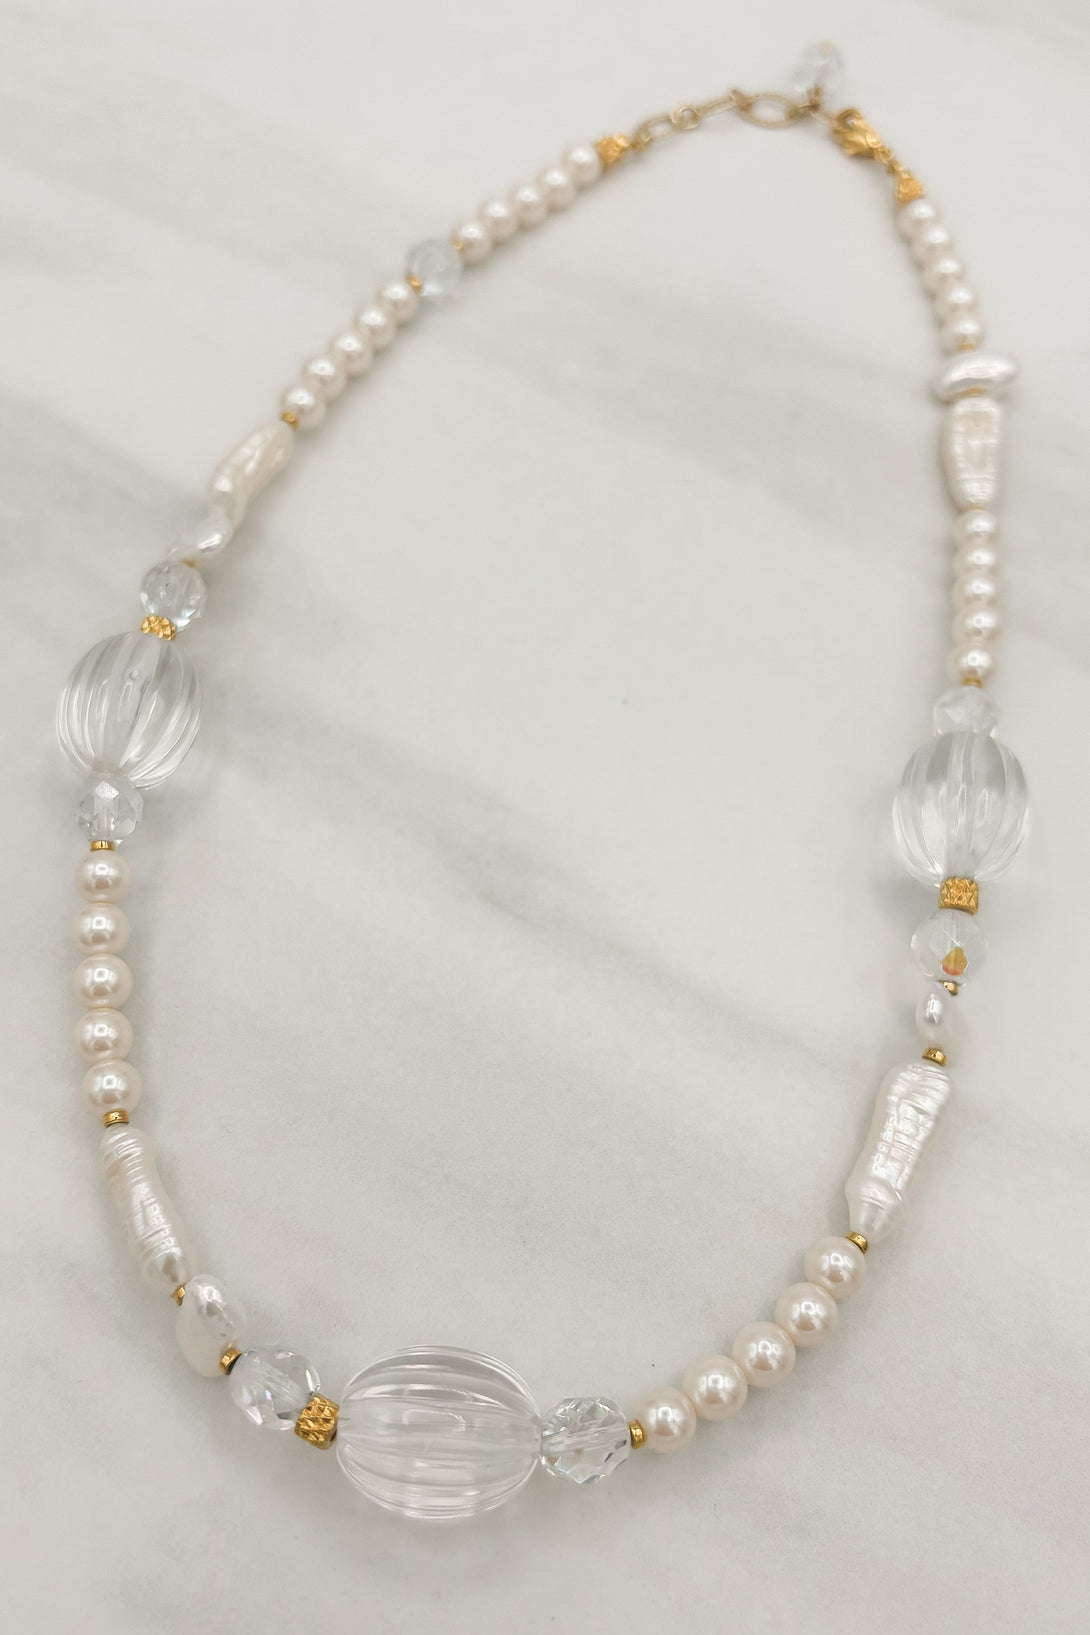 Adara Pearl Beaded Necklace with Gold Accents